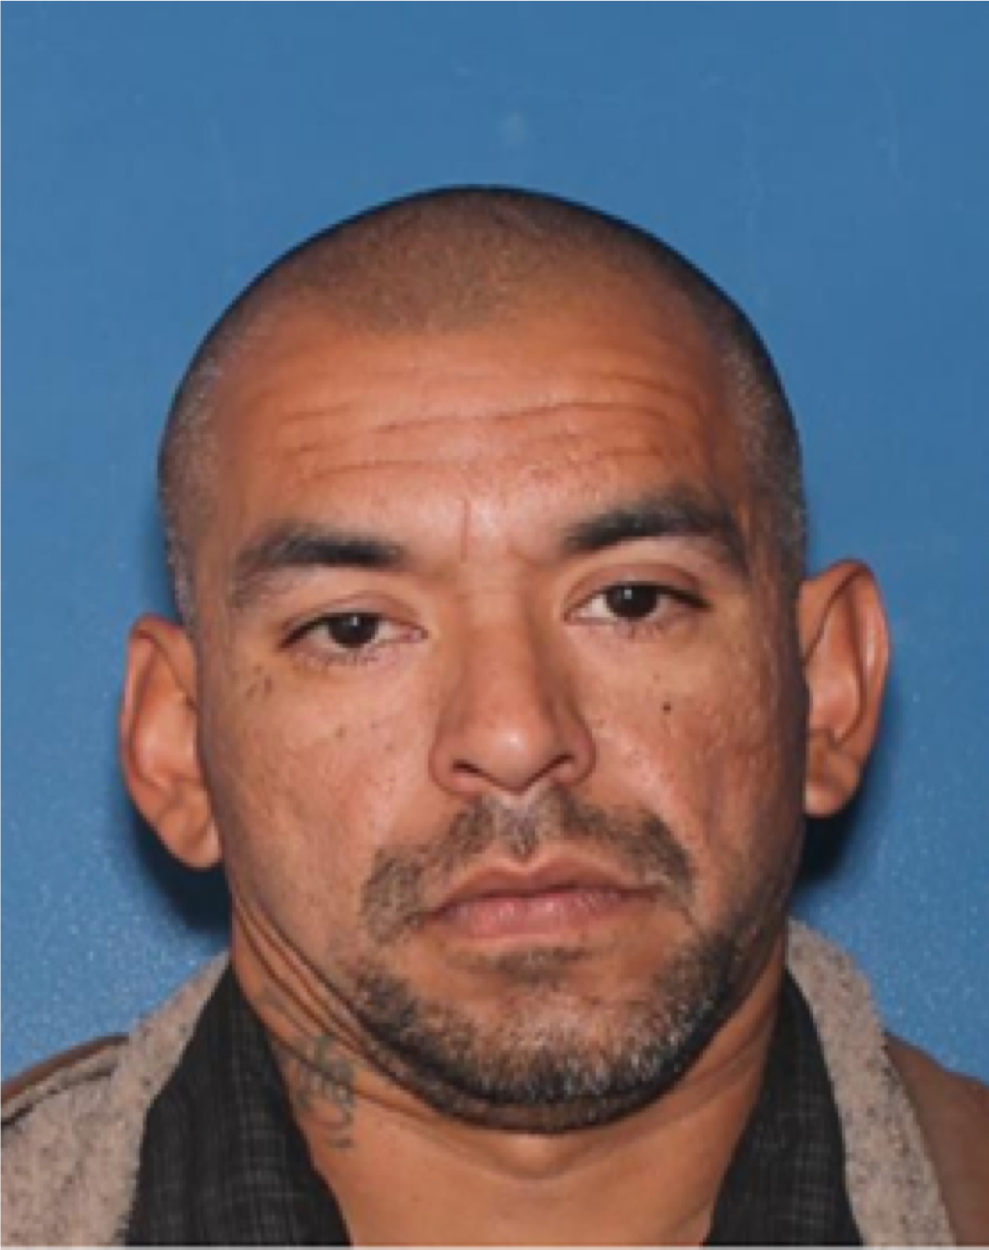 FBI Phoenix is seeking Valentin Rodriguez for his alleged involvement in an officer involved shooting on Wednesday, February 9, 2022, on the Yavapai-Apache Nation Reservation.